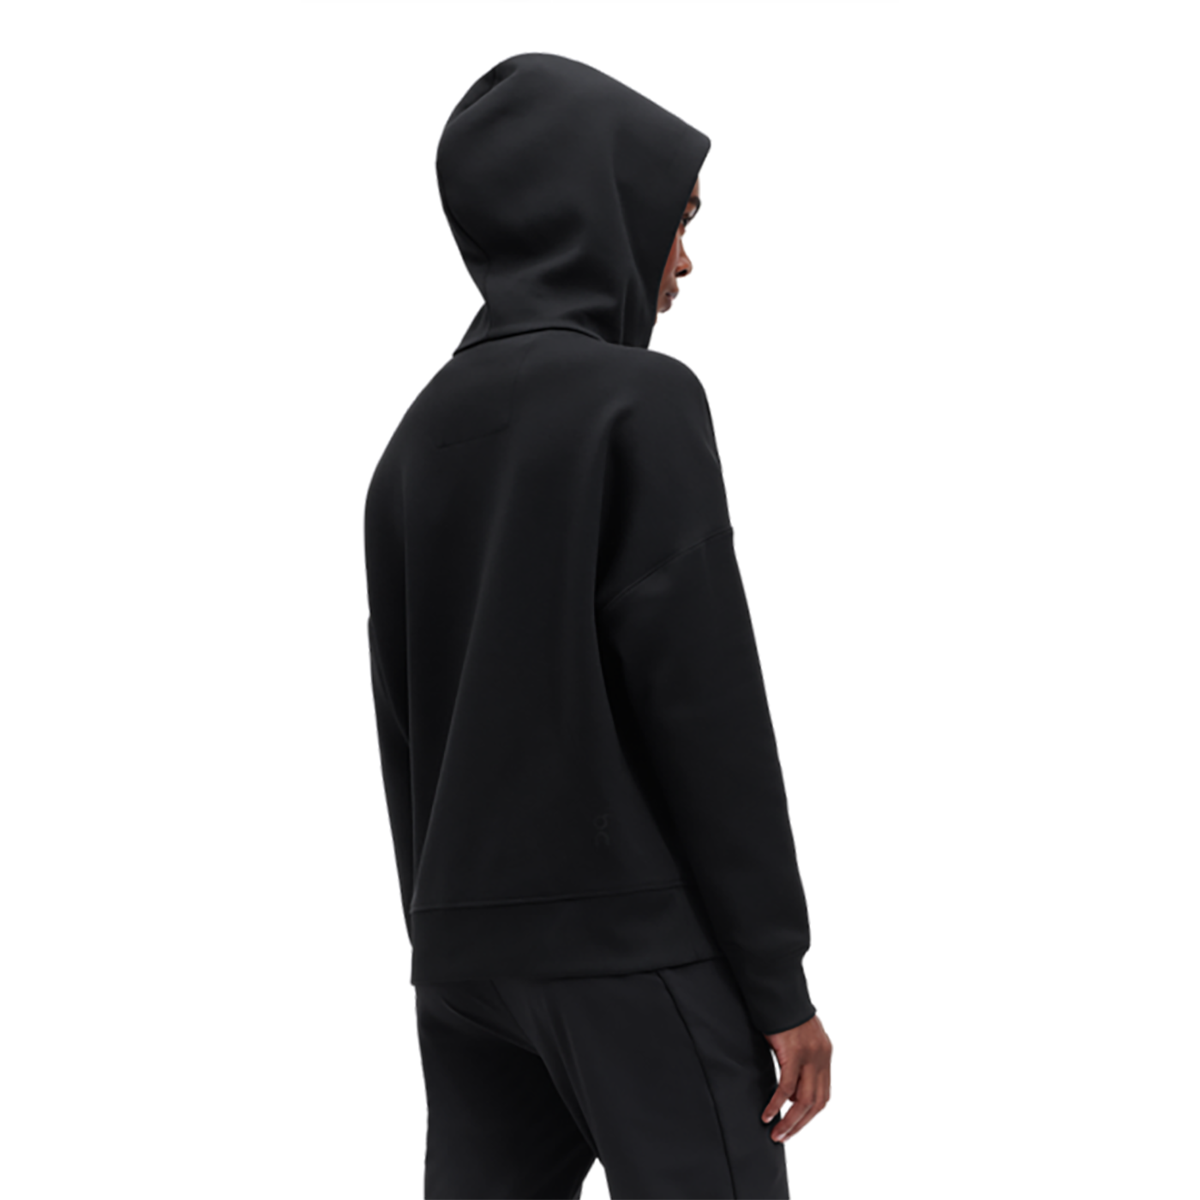 ON Zipped Hoodie, , large image number null